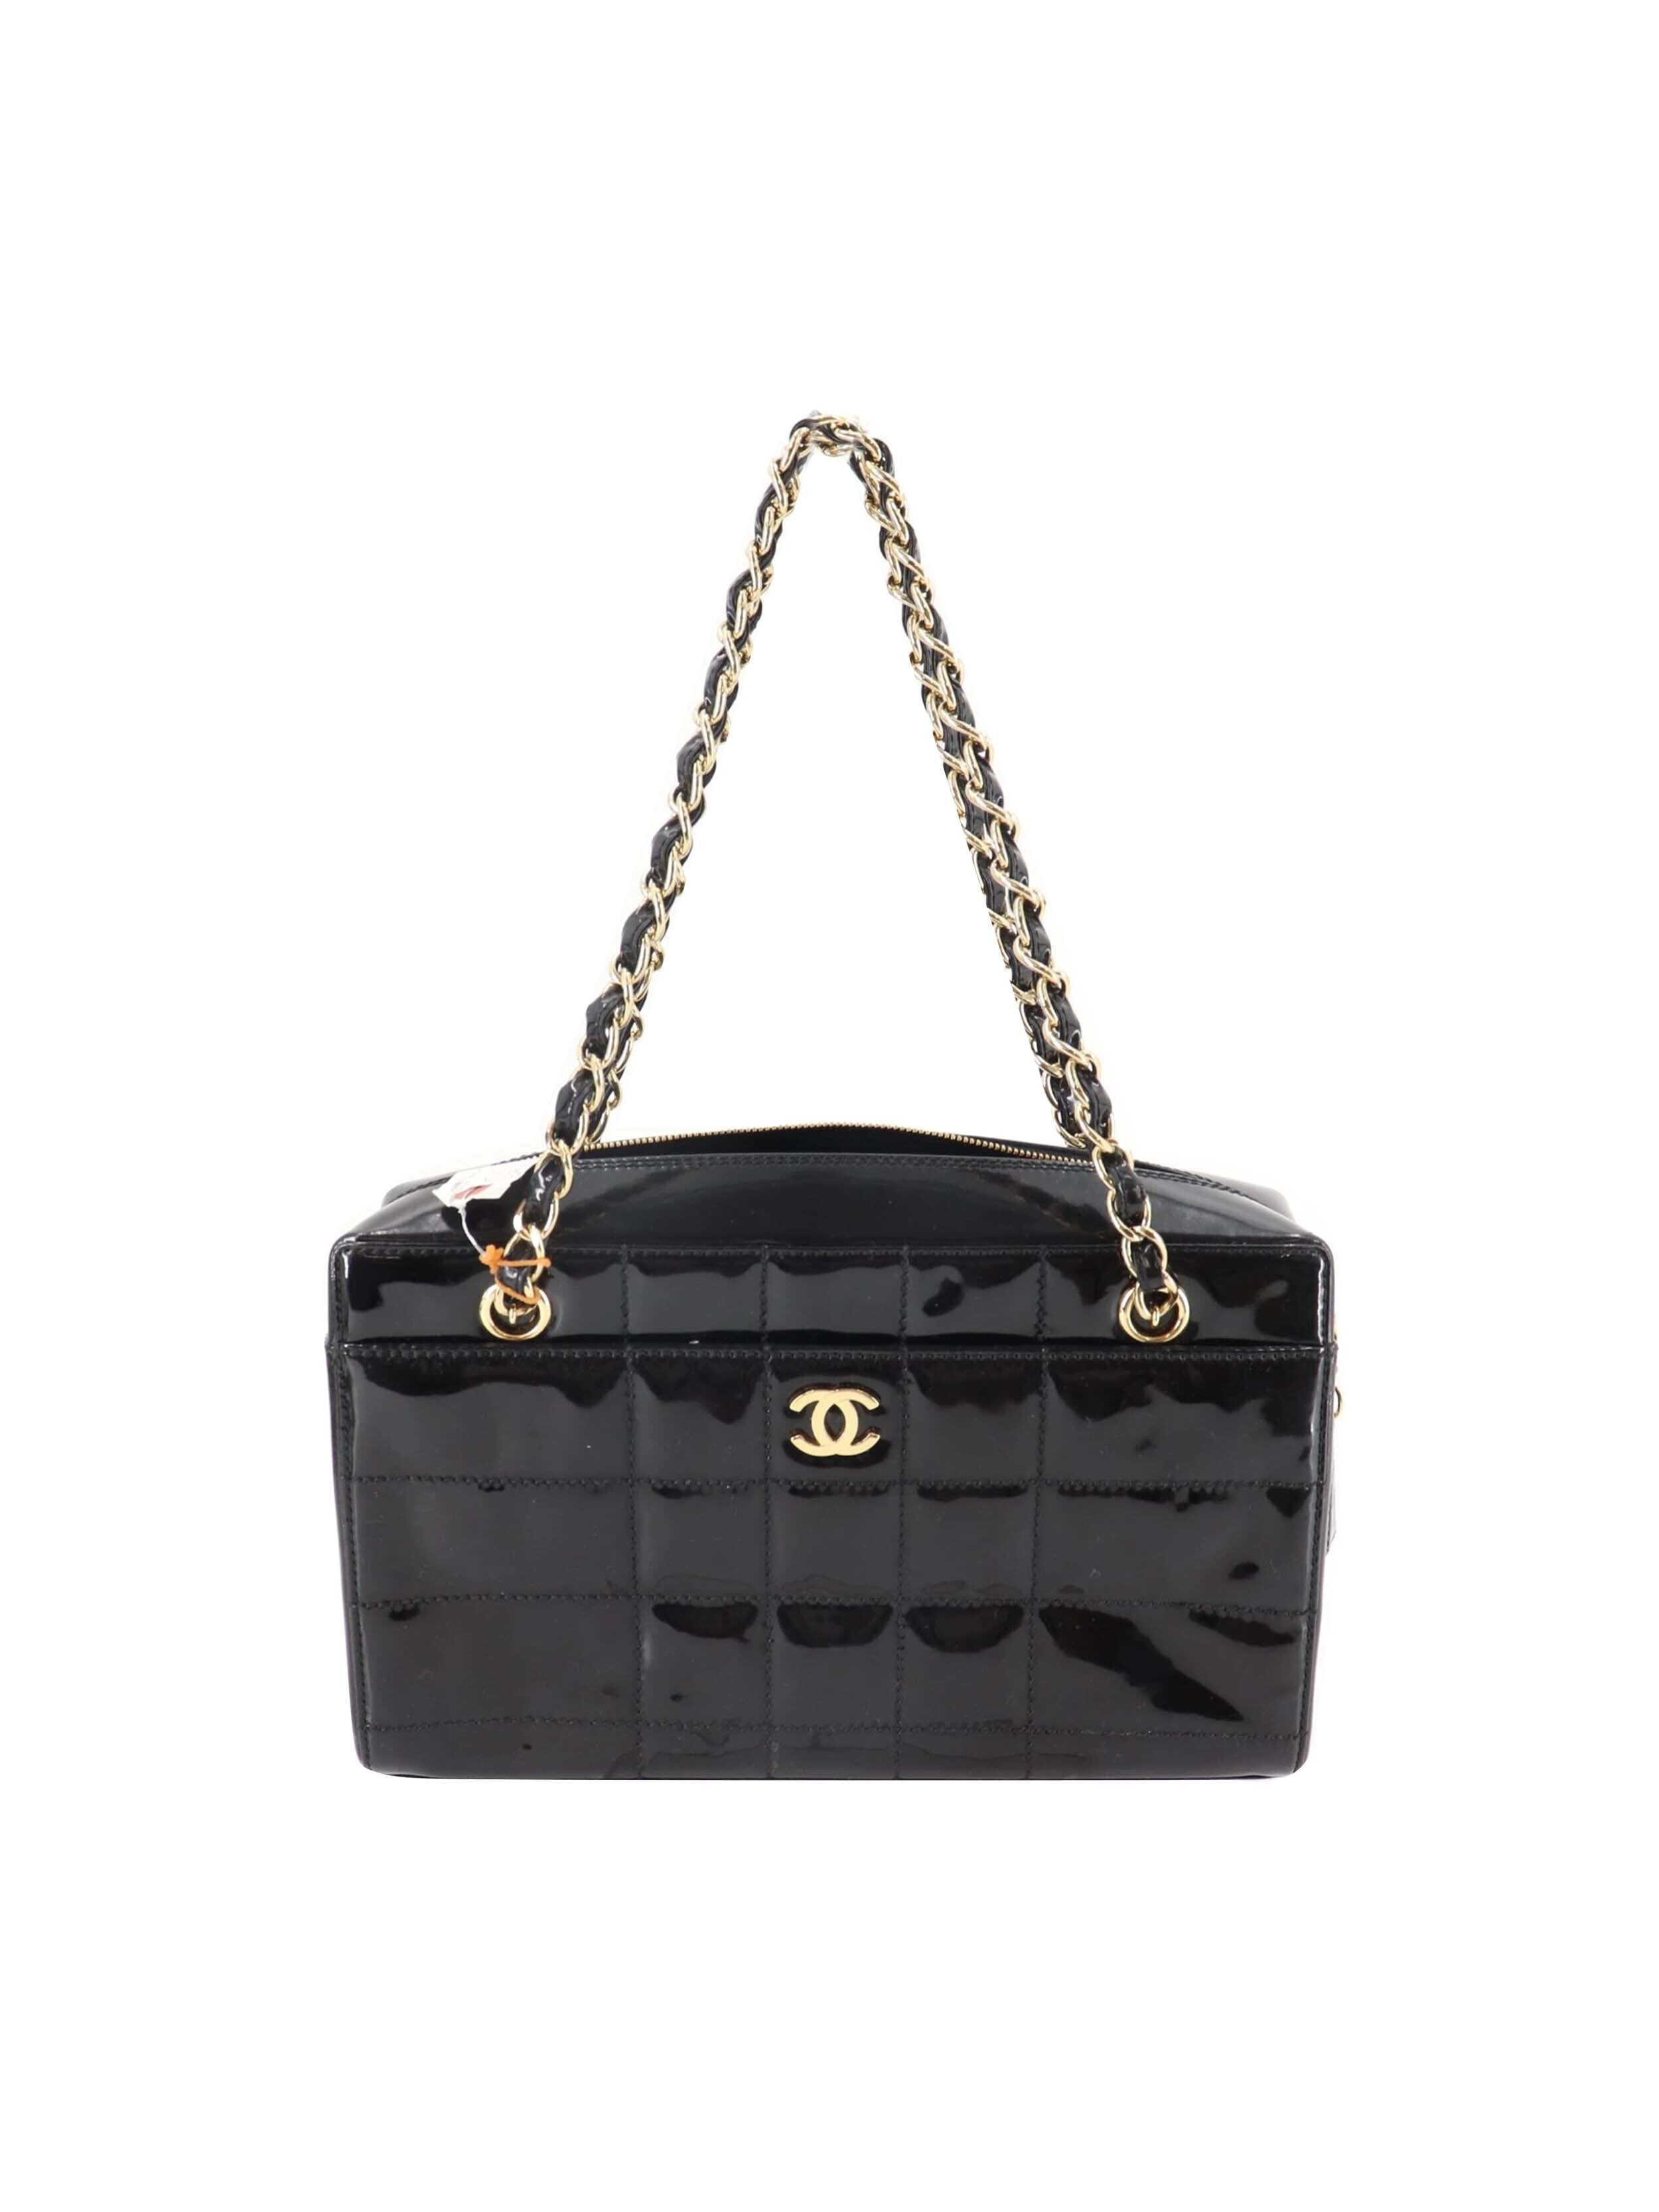 Chanel Camera Bag with Gold Chains